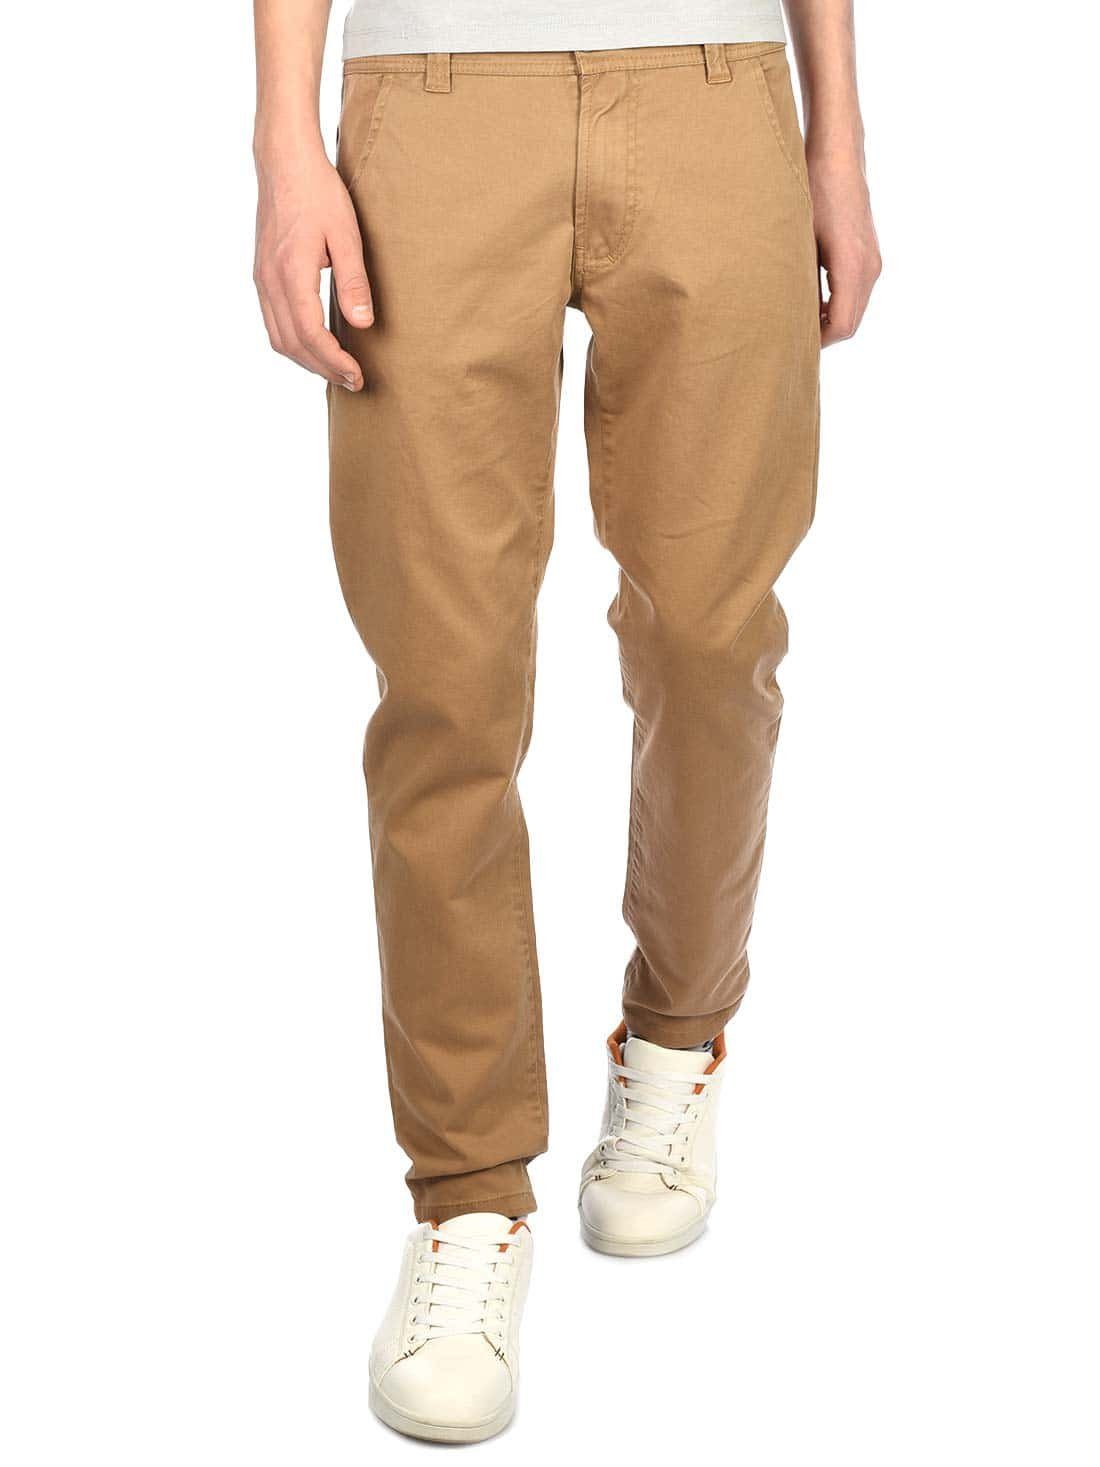 Hose Jungen BEZLIT Chinohose casual Beige (1-tlg) Chino